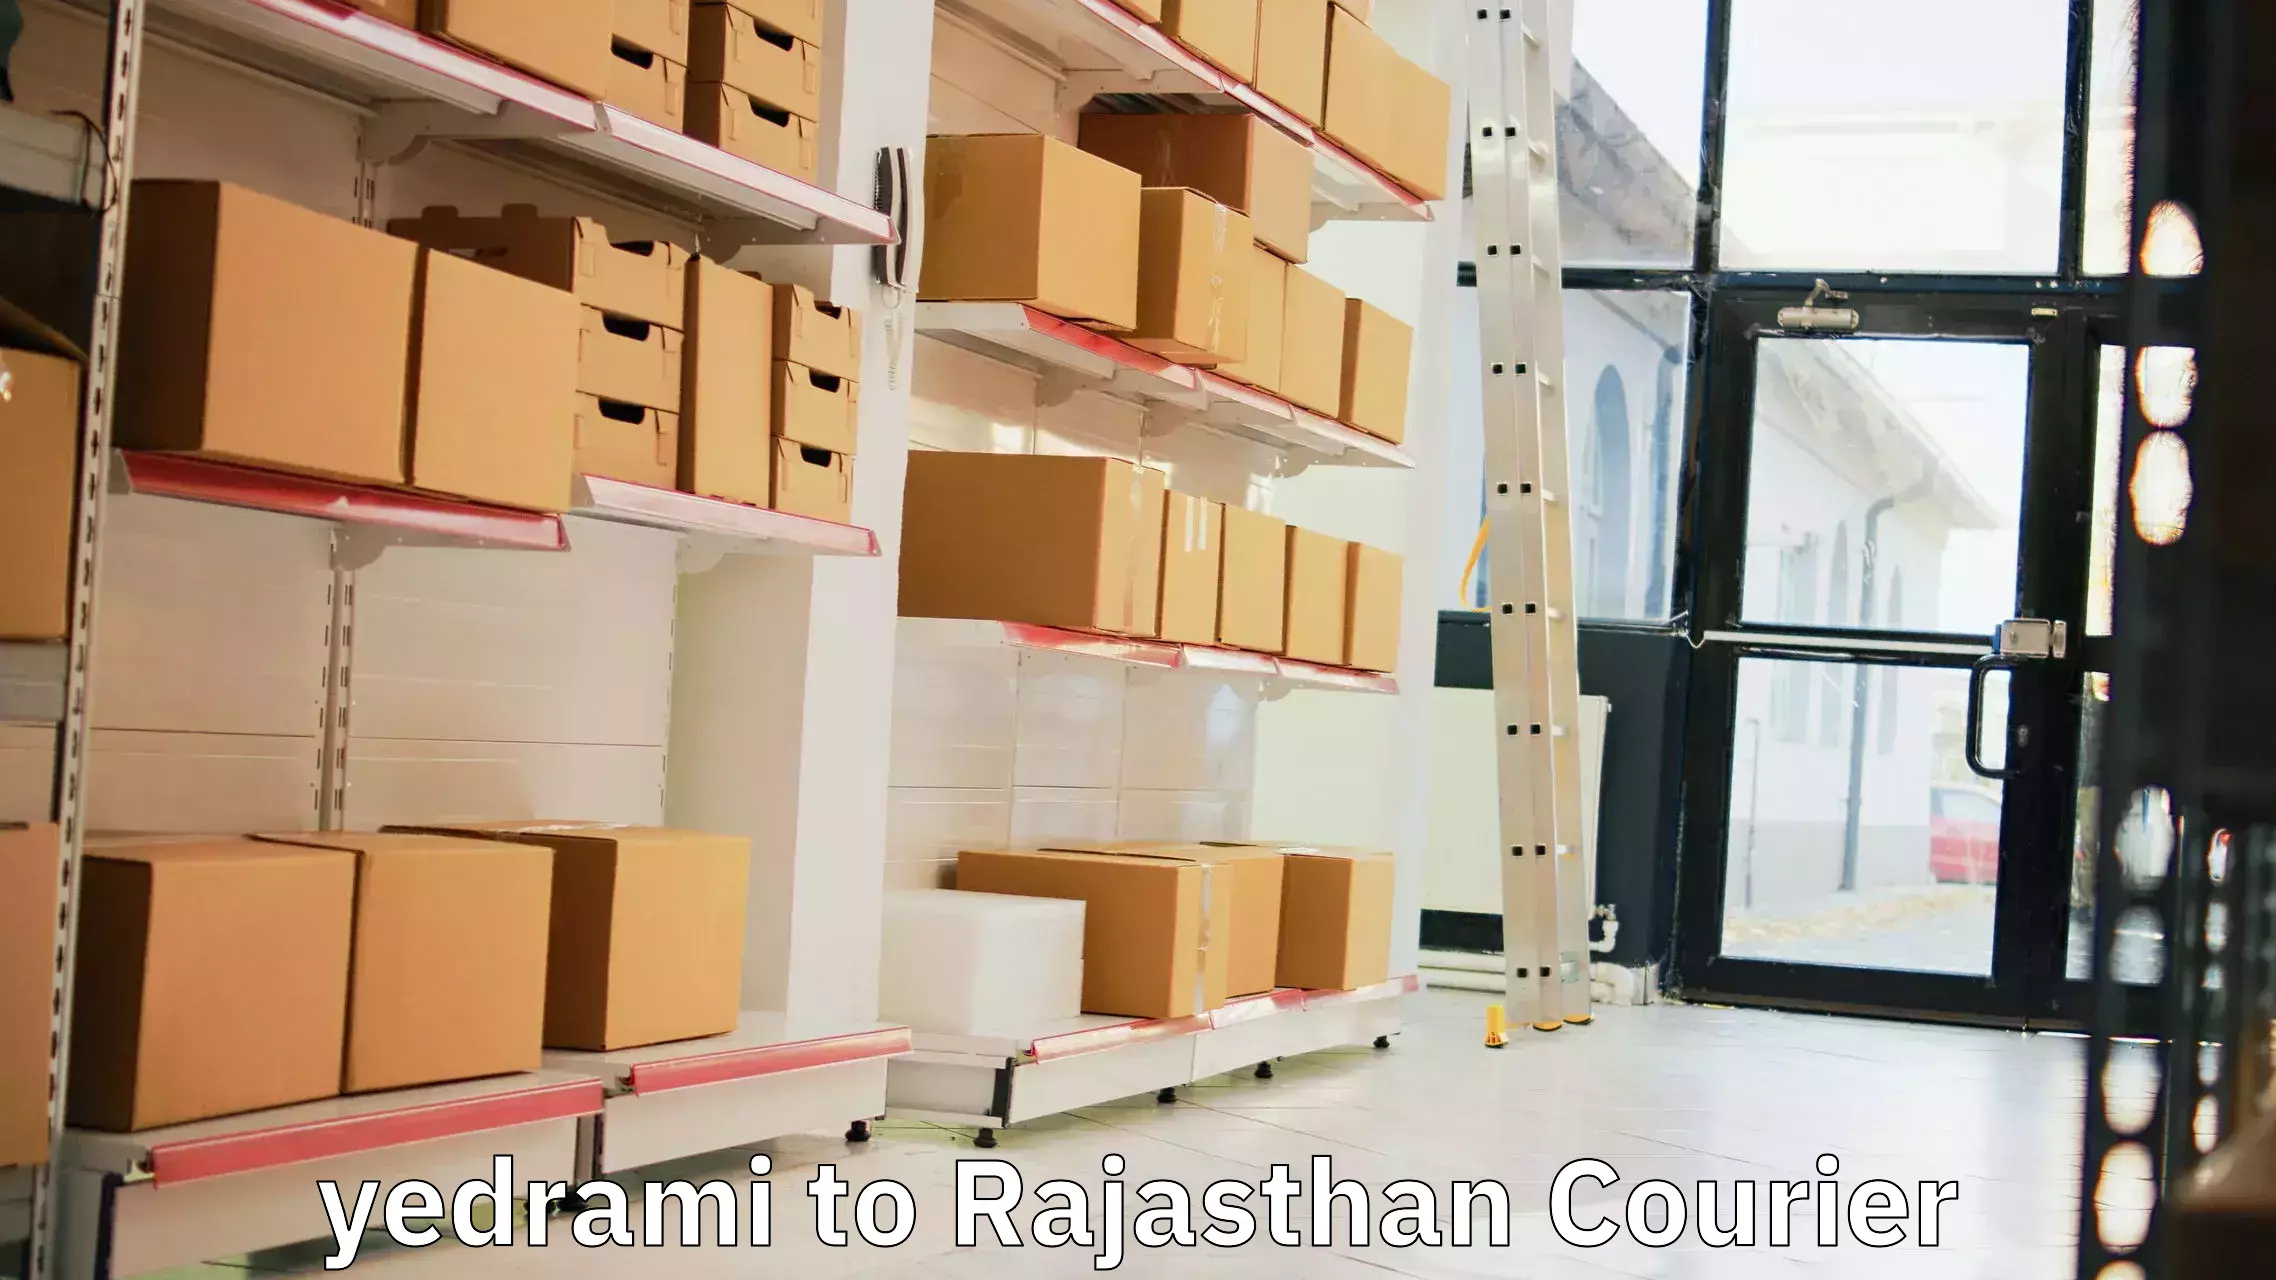 Dynamic courier services yedrami to Dholpur